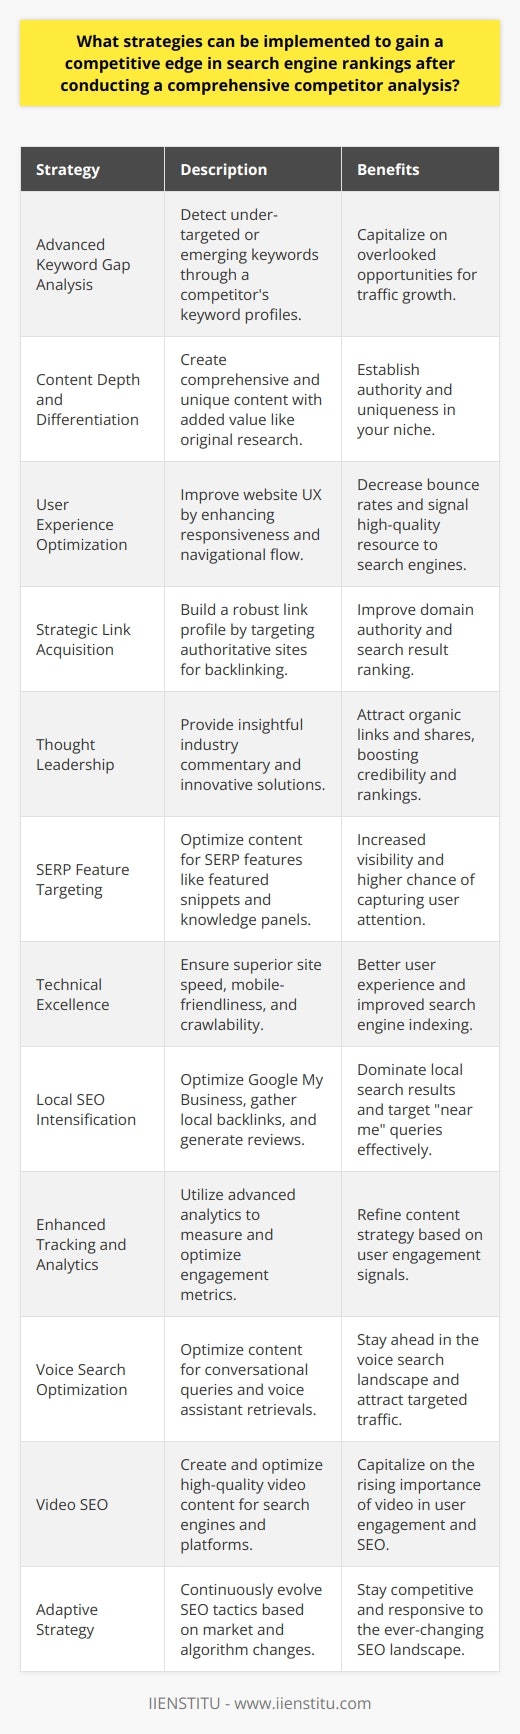 A comprehensive competitor analysis is a foundational step in deploying strategies to enhance search engine rankings. By gaining insights into the tactics and successes of competitors, you can refine your approach to SEO and leapfrog over them in search results.Here are several strategies that stem from in-depth competitor analysis:1. **Advanced Keyword Gap Analysis**: After a thorough examination of competitors' keyword profiles, unearth under-targeted or emerging keywords that they may have overlooked. Use tools to detect these gaps and craft content around these terms to capitalize on missed opportunities.2. **Content Depth and Differentiation**: Create authoritative content that not only covers topics more comprehensively than the competitors but also offers unique value that isn’t widely available online. This can include original research, expert insights, or innovative perspectives on industry trends.3. **User Experience Optimization**: Analyze how competitors structure their sites and aim to improve your website's user experience (UX). This includes both the responsiveness on various devices and the navigational flow. If users can find information easier and faster on your site, this will reduce bounce rates and signal to search engines that your site is a high-quality resource.4. **Strategic Link Acquisition**: Analyze the backlink profiles of competitors and identify authoritative sites that link to them. Develop a content outreach and link-building campaign targeting these and similar sites to build a more robust link profile.5. **Thought Leadership**: Position yourself or your business as an industry leader by consistently creating insightful commentary on industry news, offering innovative solutions to common problems, or predicting future trends. This draws organic links and shares, boosting your credibility and rankings.6. **SERP Feature Targeting**: Analyzing competitors' appearances in SERP features like featured snippets, knowledge panels, or People also ask sections can reveal key opportunities. Tailor content to address these features, optimizing for answer boxes or formulating Q&A style content.7. **Technical Excellence**: Conduct a technical audit to ensure your site excels where competitors falter. This encompasses improving site speed, ensuring mobile-friendliness, fixing broken links, and streamlining site architecture for better crawlability.8. **Local SEO Intensification**: If competitors are not fully leveraging local SEO, ensure you claim and optimize your Google My Business listings, gather local backlinks, and generate positive, authentic reviews. Accurately target local near me searches and localized keywords.9. **Enhanced Tracking and Analytics**: Beyond conventional tracking, deploy advanced analytics to measure user engagement metrics like time on page and interaction rates. This informs content optimization and enhances signals that are favored by algorithms.10. **Voice Search Optimization**: As voice search becomes more prevalent, ensure your content is optimized for conversational queries, targeting long-tail keywords, and structured to provide direct answers that voice assistants can easily pull from.11. **Video SEO**: Given the growing prominence of video content, research competitors' video offerings. If they lack a significant presence, invest in high-quality video content and optimize it for both search engines and platforms like YouTube.12. **Adaptive Strategy**: Above all, maintain a flexible SEO strategy that evolves based on competitive landscape shifts and search engine algorithm updates. Continually reassess your tactics, adapting to the new data, trends, and competitor moves.Using these strategies that emerge from a meticulous competitor analysis will lead to a well-rounded and formidable SEO approach, priming your web presence for climbing search engine ranks and eclipsing your rivals.